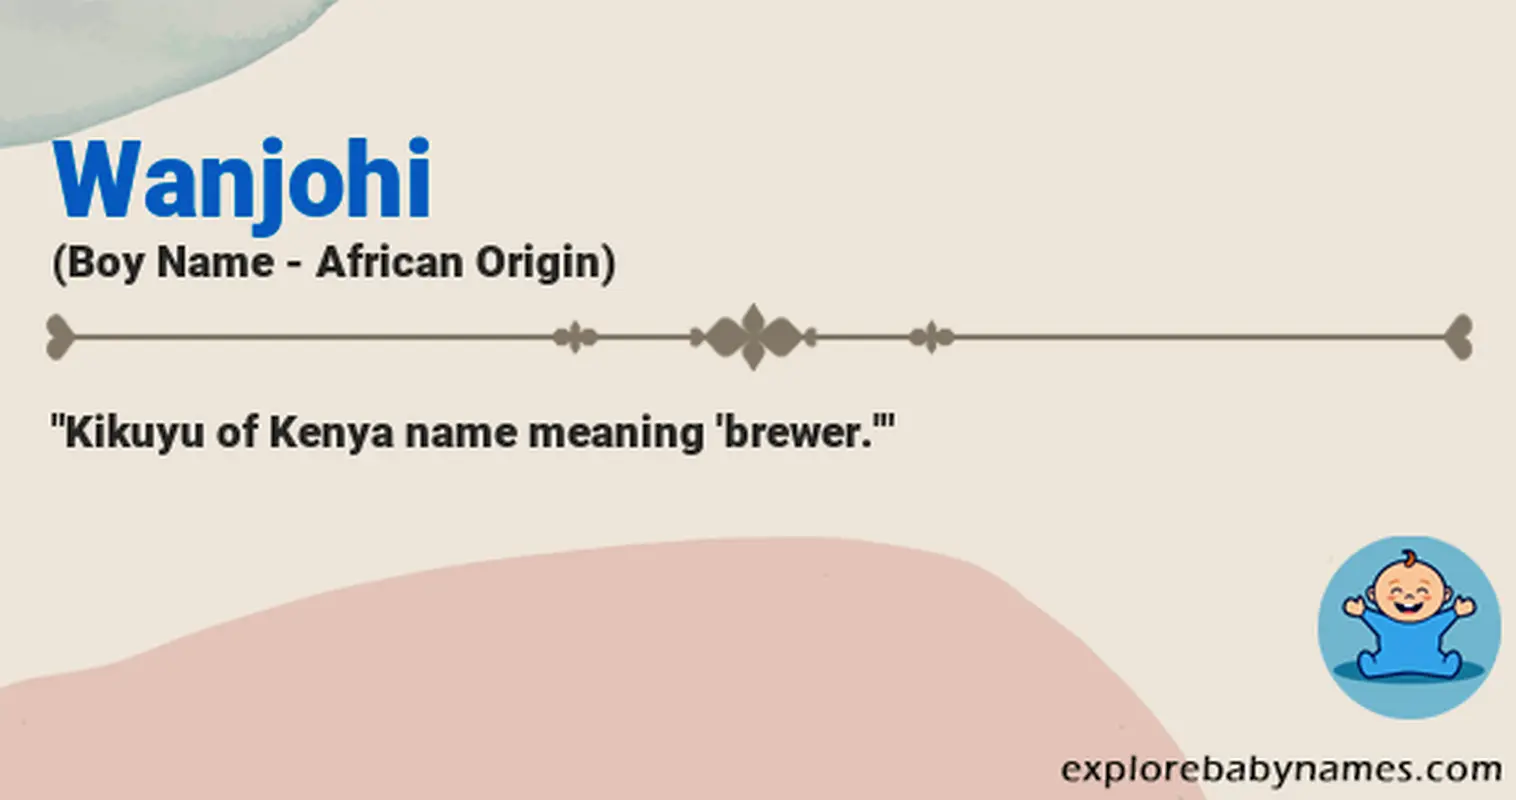 Meaning of Wanjohi